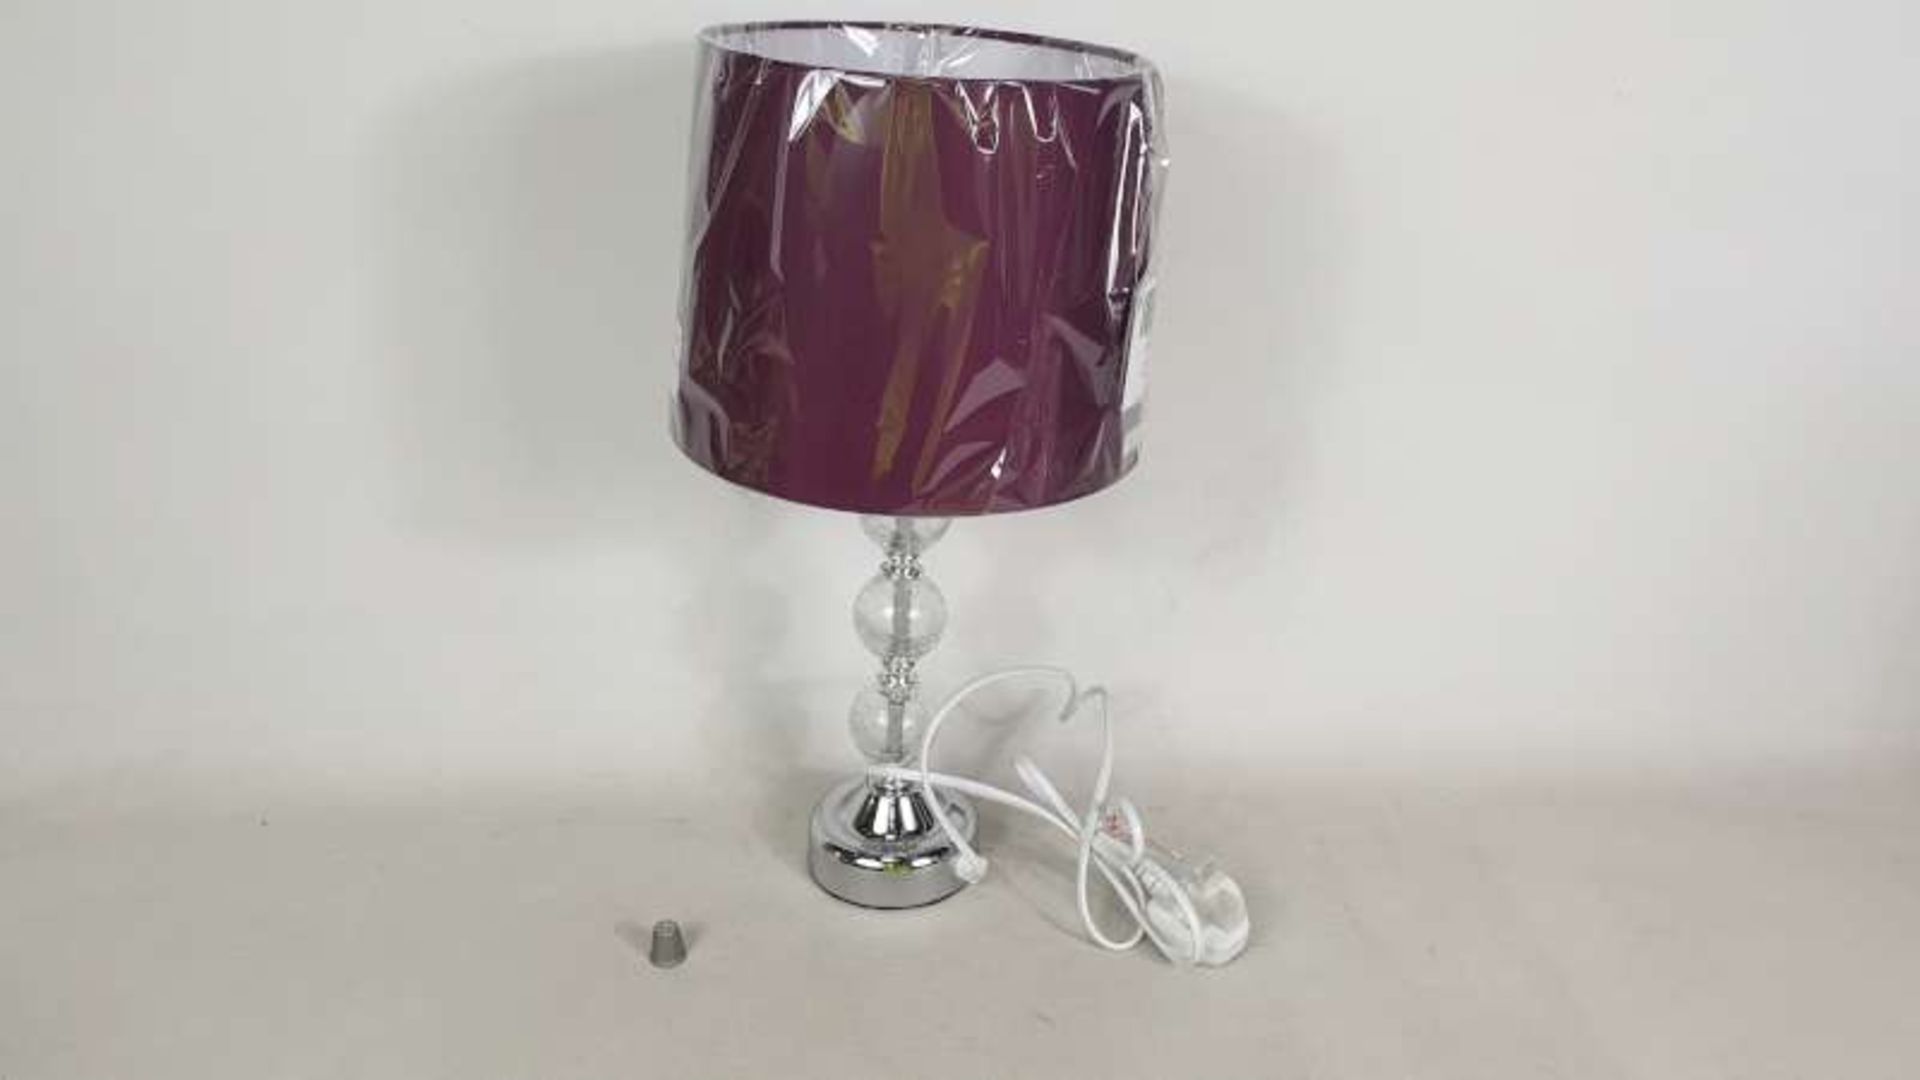 12 X BRAND NEW BOXED CRACKLE GLASS BALL TOUCH TABLE LAMP WITH PURPLE COLOURED SHADE IN 2 BOXES